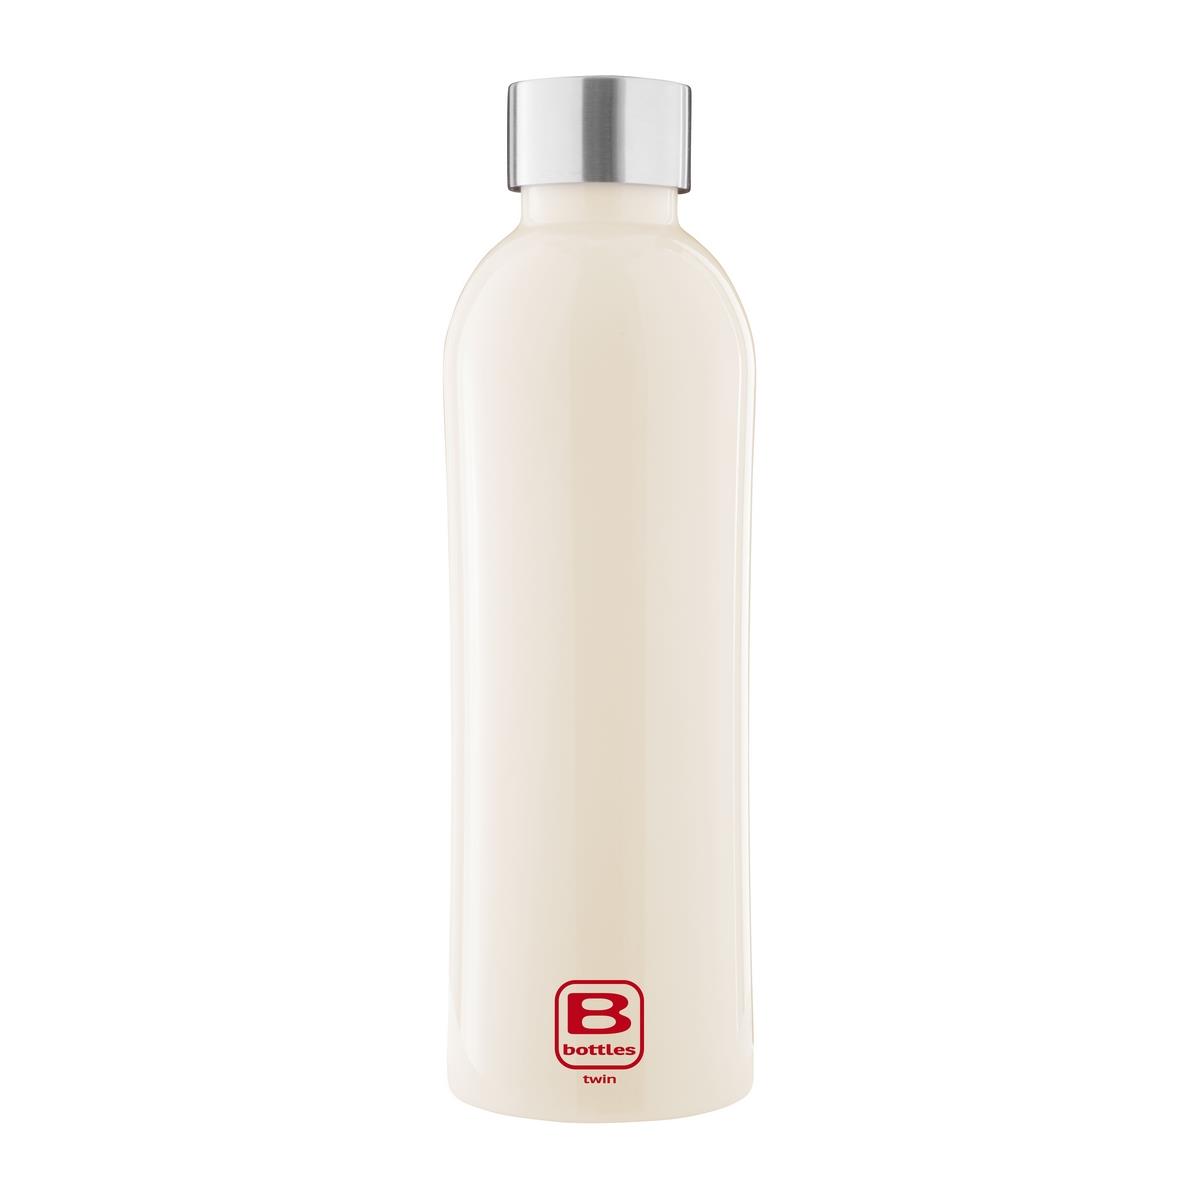 photo B Bottles Twin - Cream - 800 ml - Double wall thermal bottle in 18/10 stainless steel